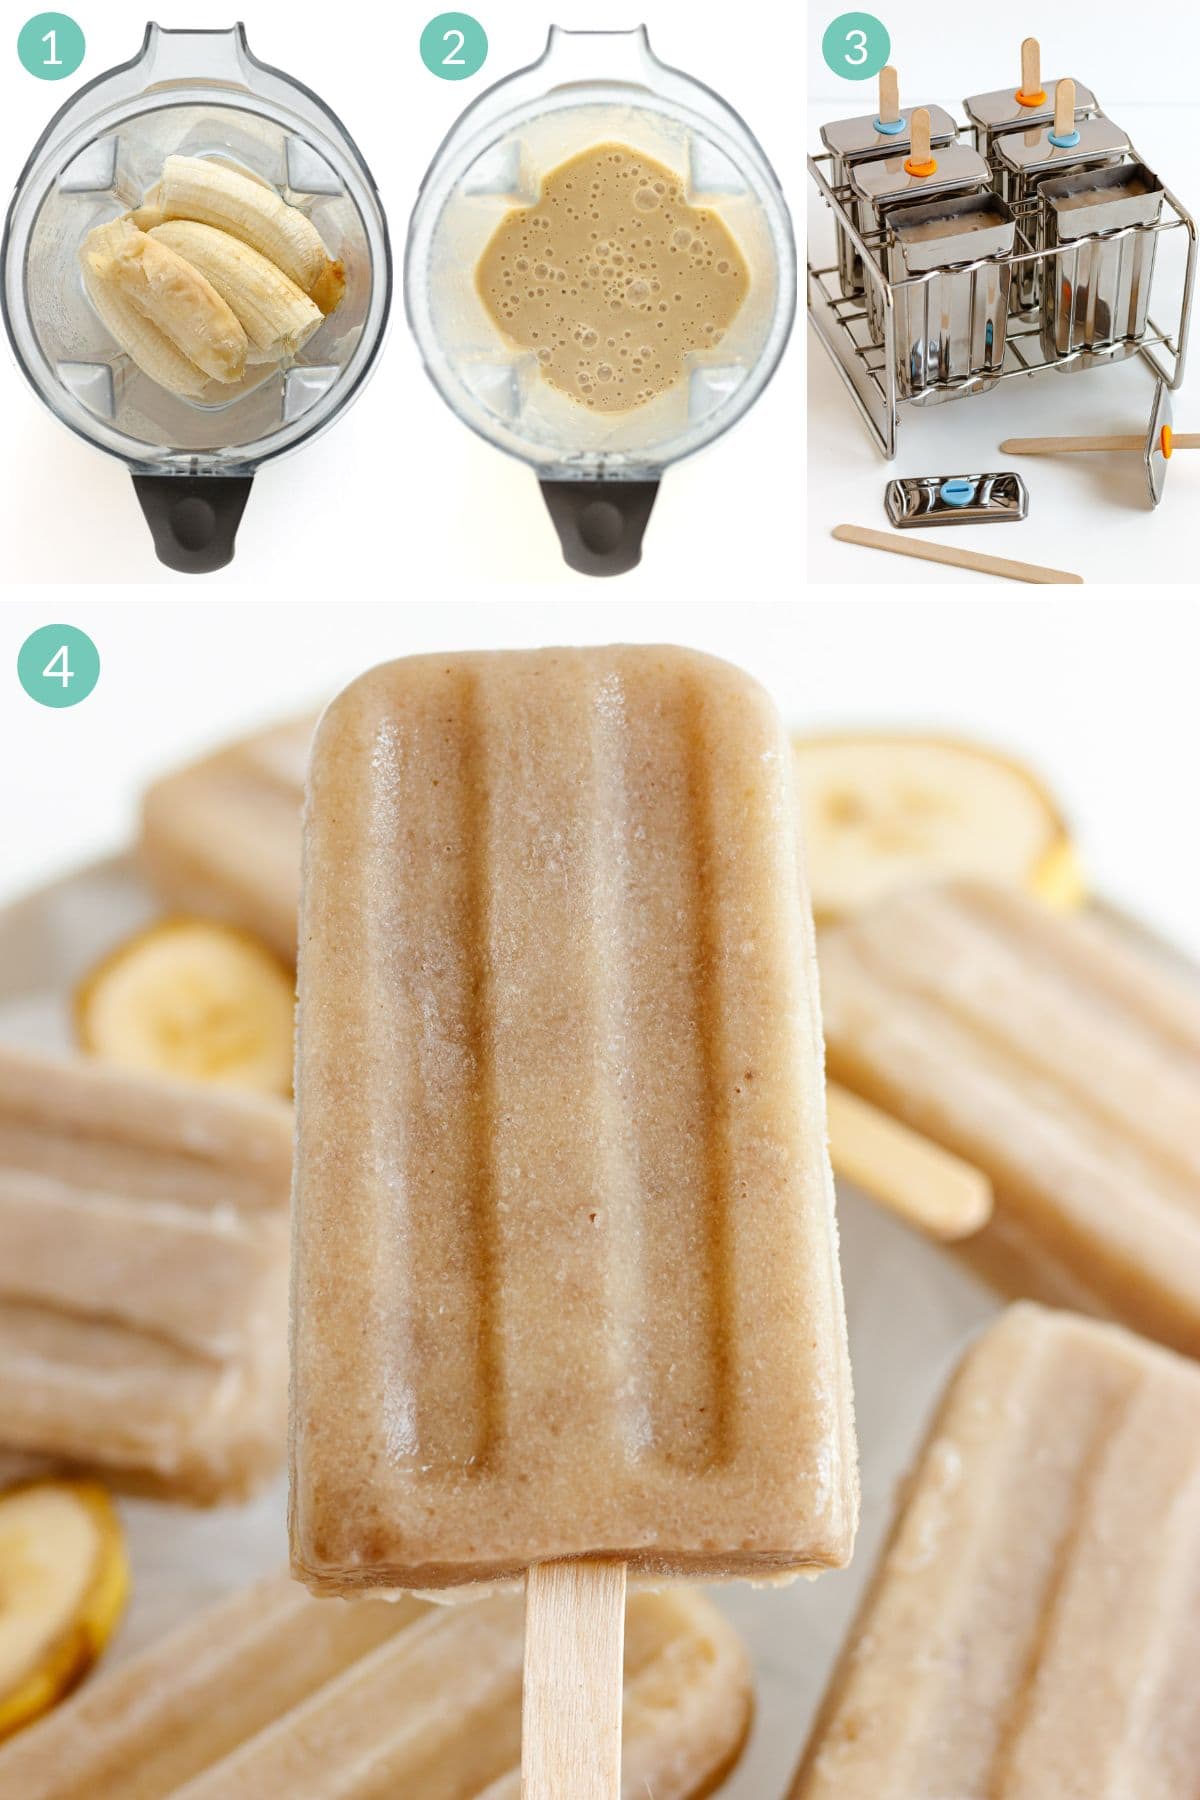 Numbered photo collage showing how to make homemade banana popsicles.